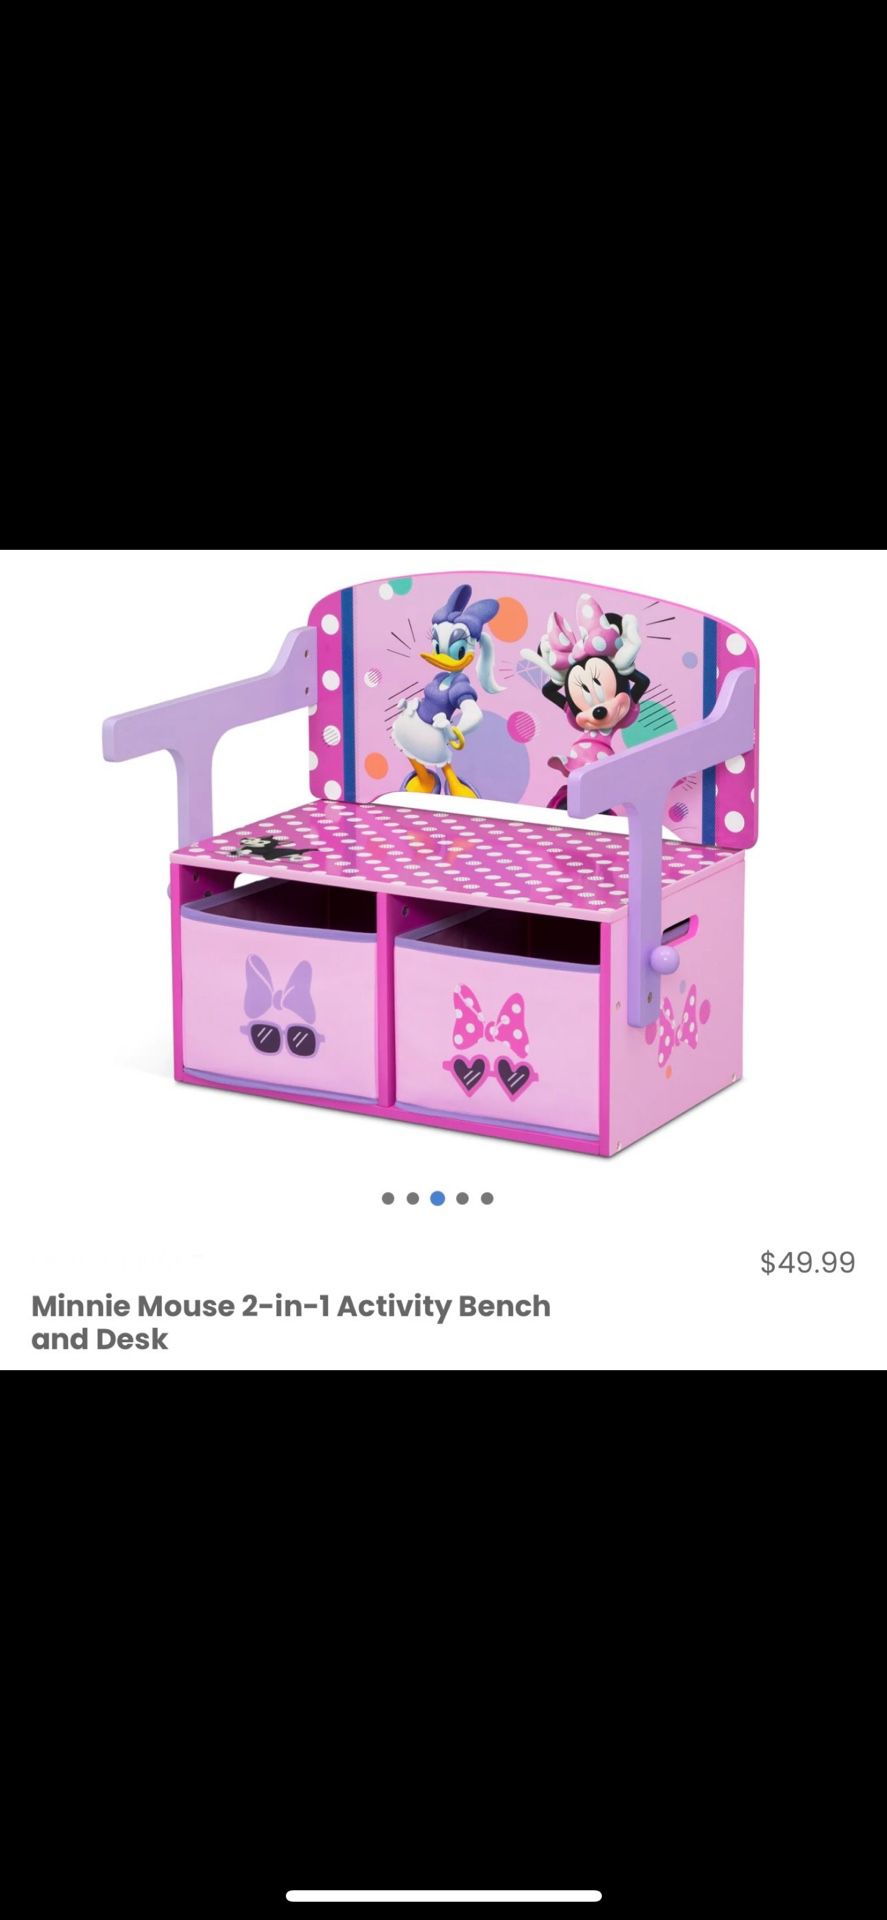 Minnie Mouse 2 In 1 Activity Bench & Desk/ Minnie Mouse/ Disney/ Toys/ Toddler/kids/ New